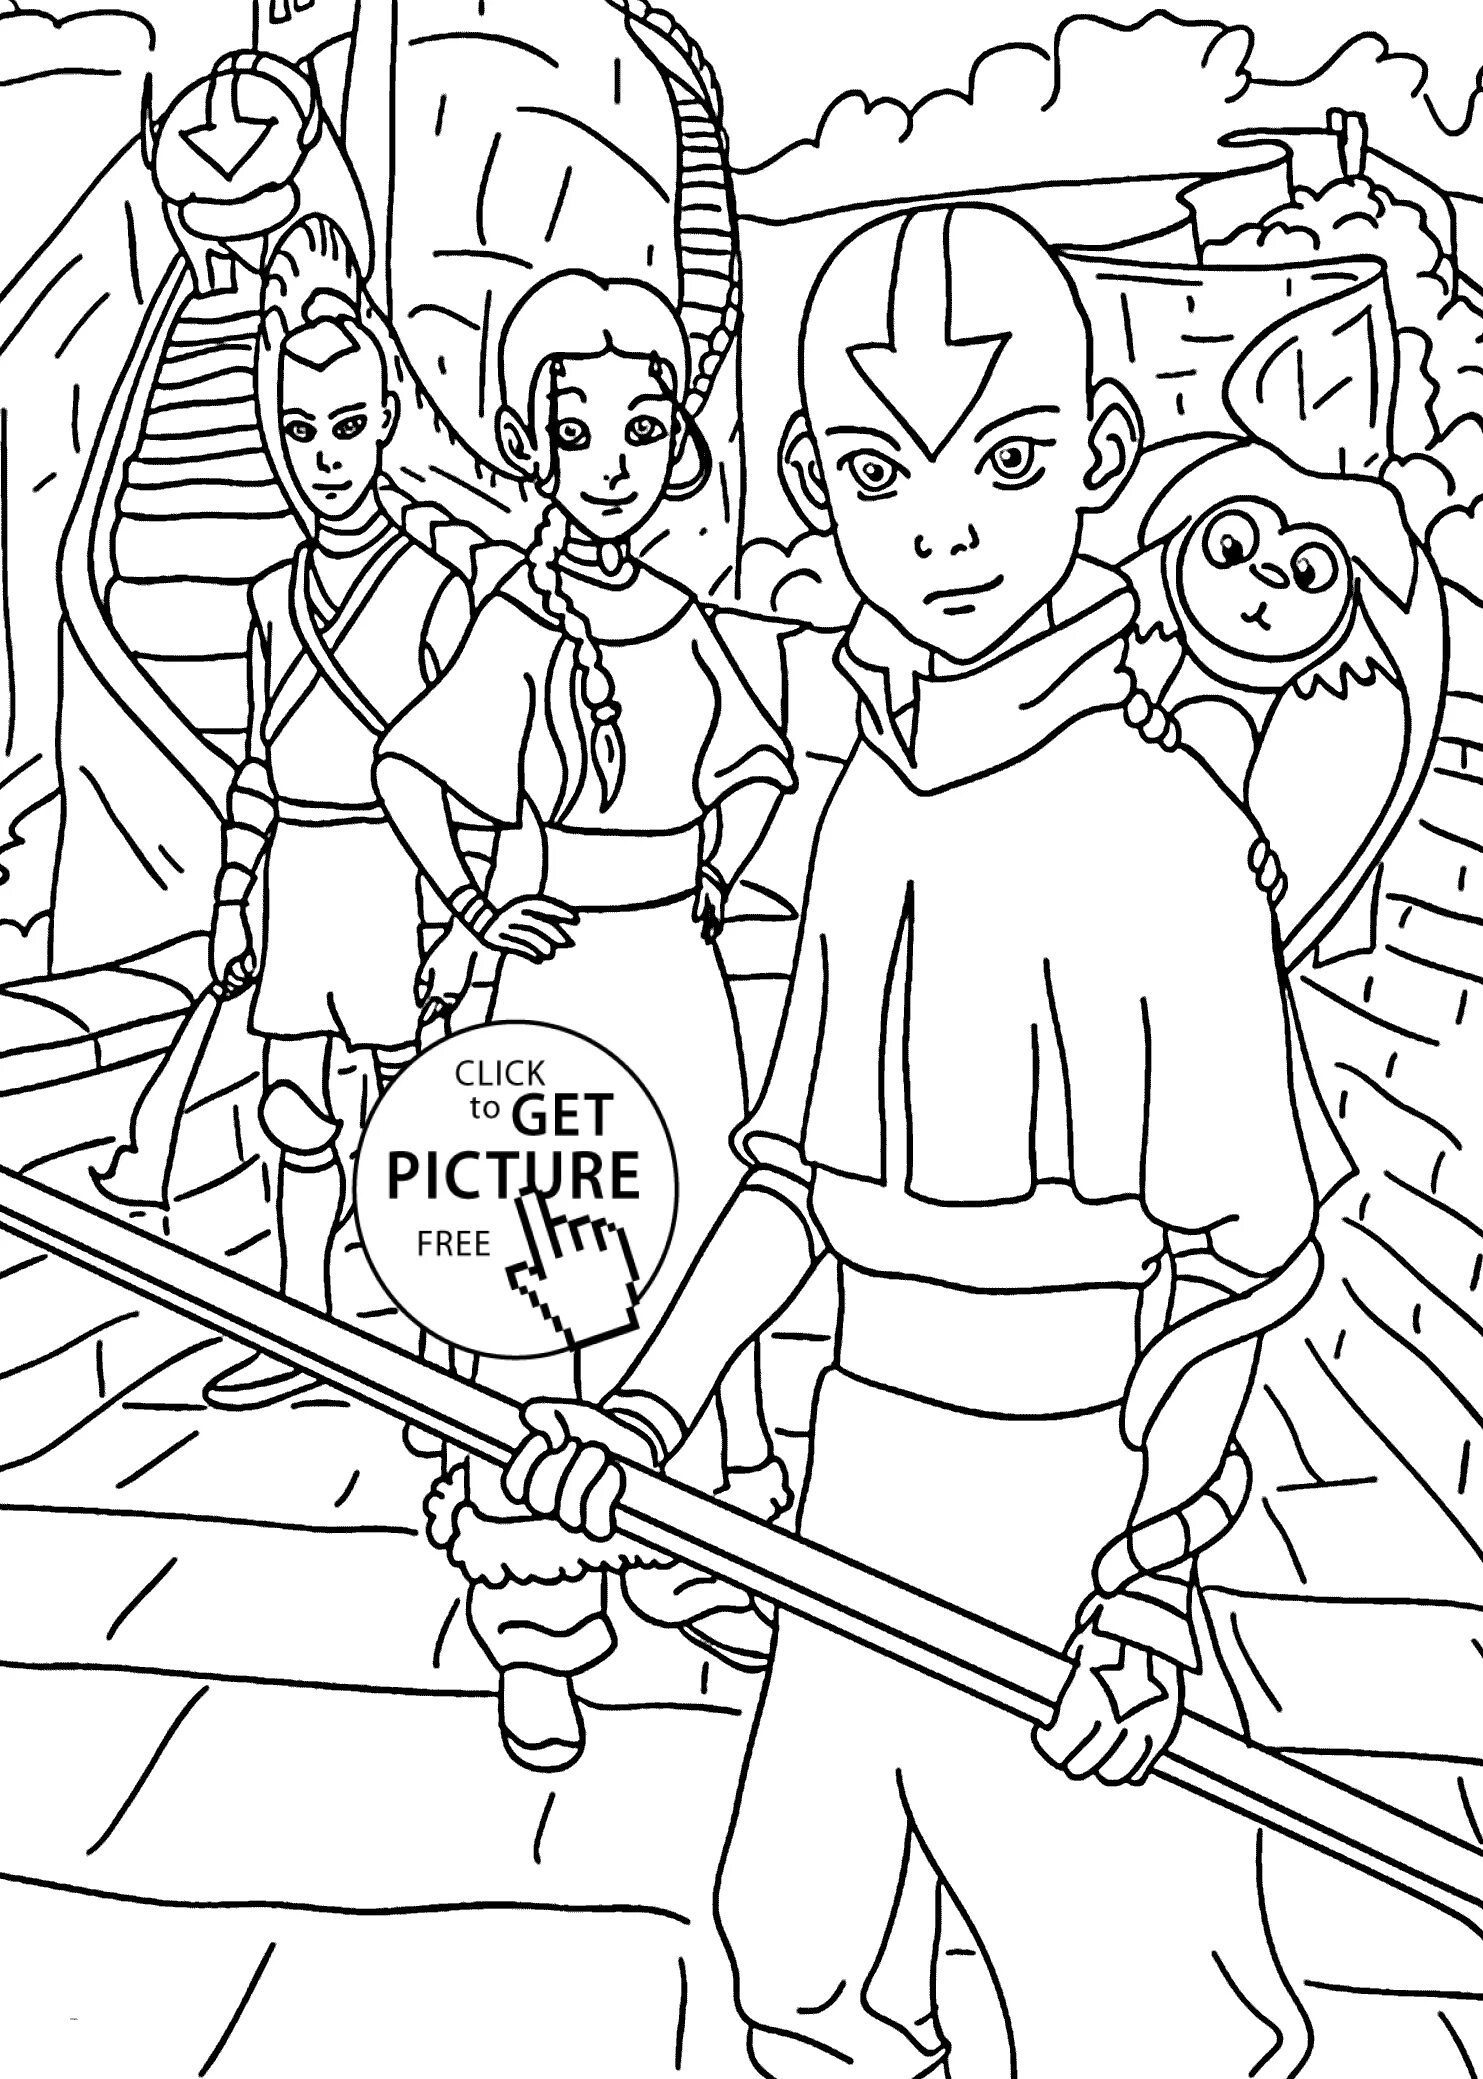 Aang's adorable coloring page